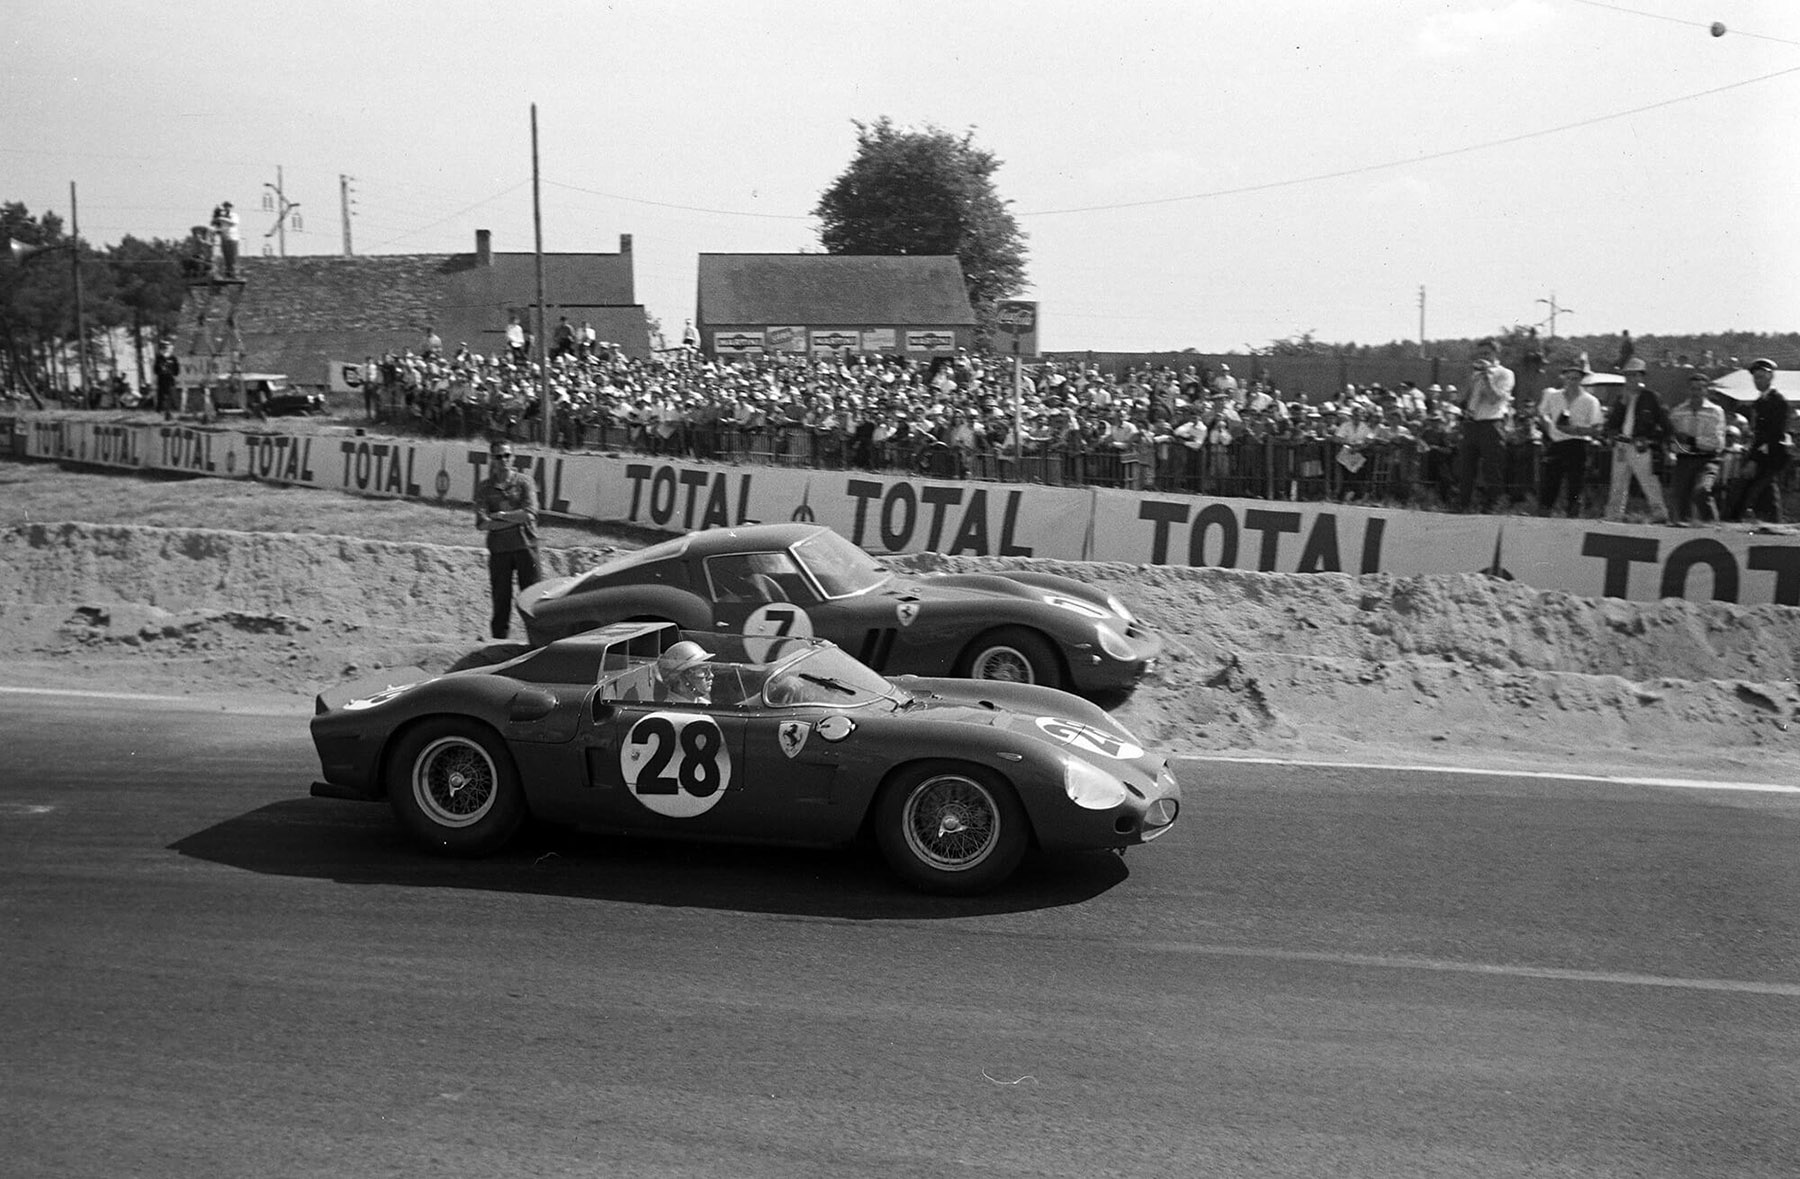 Ricardo Rodriguez and Pedro Rodriguez’s Ferrari Dino 246 SP (#28) passes Mike Parkes and Lorenzo Bandini’s Ferrari (#7) beached by the side of the track during the 24 Hours of Le Mans at Circuit de la Sarthe on 24 June 1962.